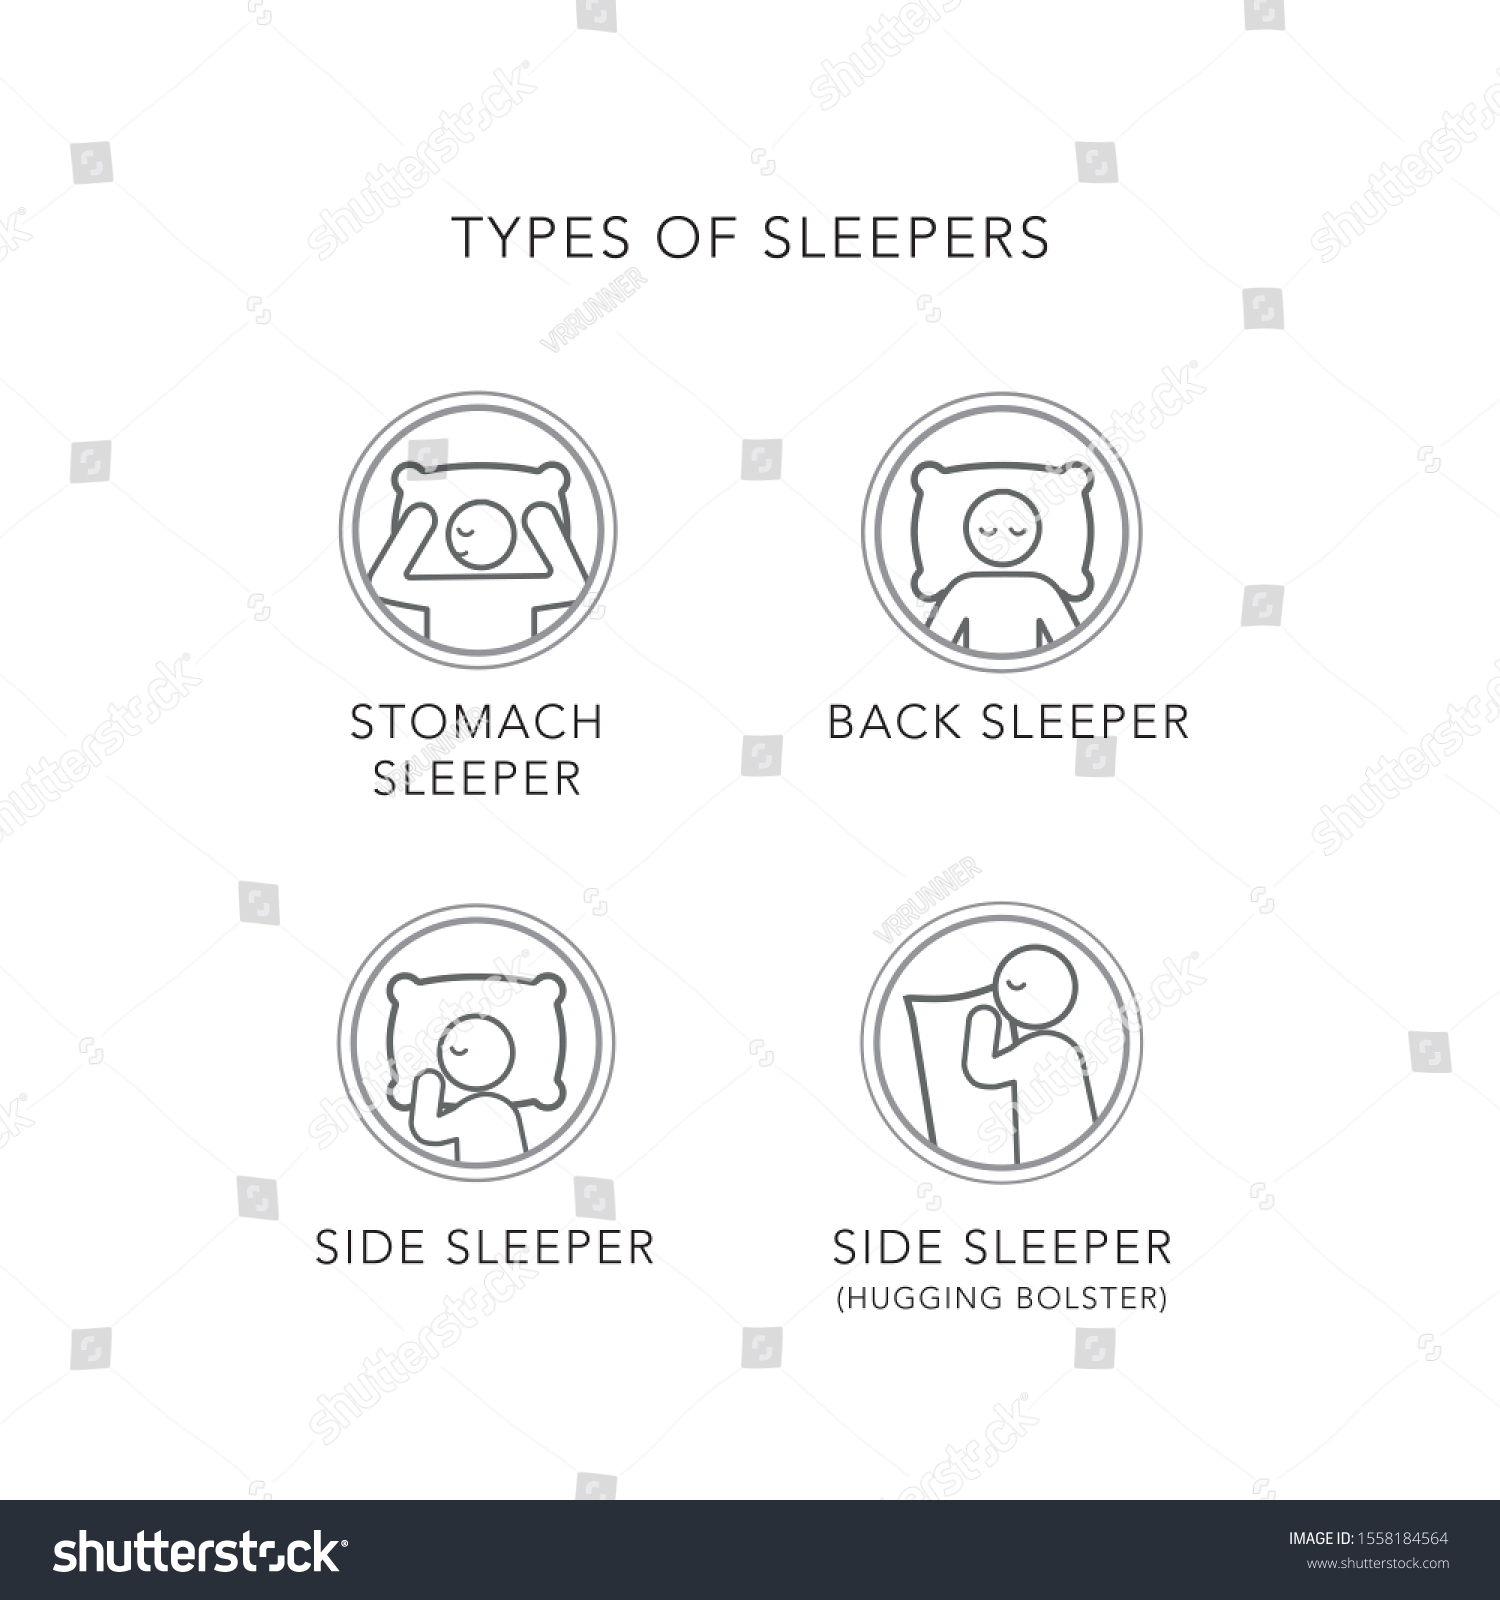 SVG of Types of sleepers icon/symbol-black and white svg